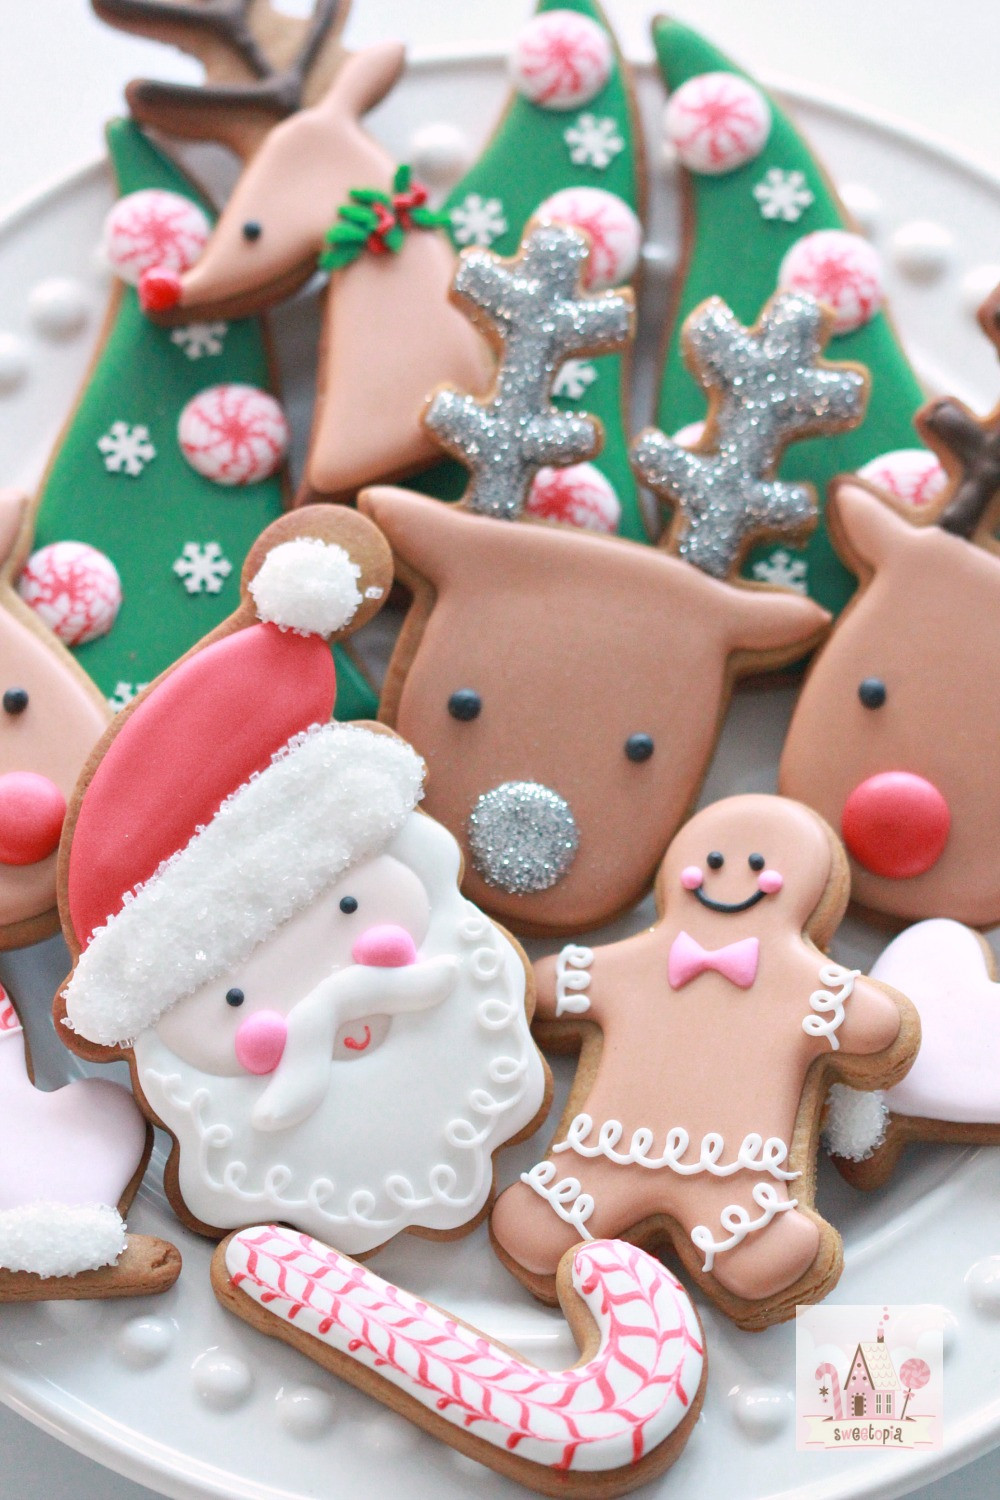 Royal Icing Christmas Cookies
 Video How to Decorate Christmas Cookies Simple Designs